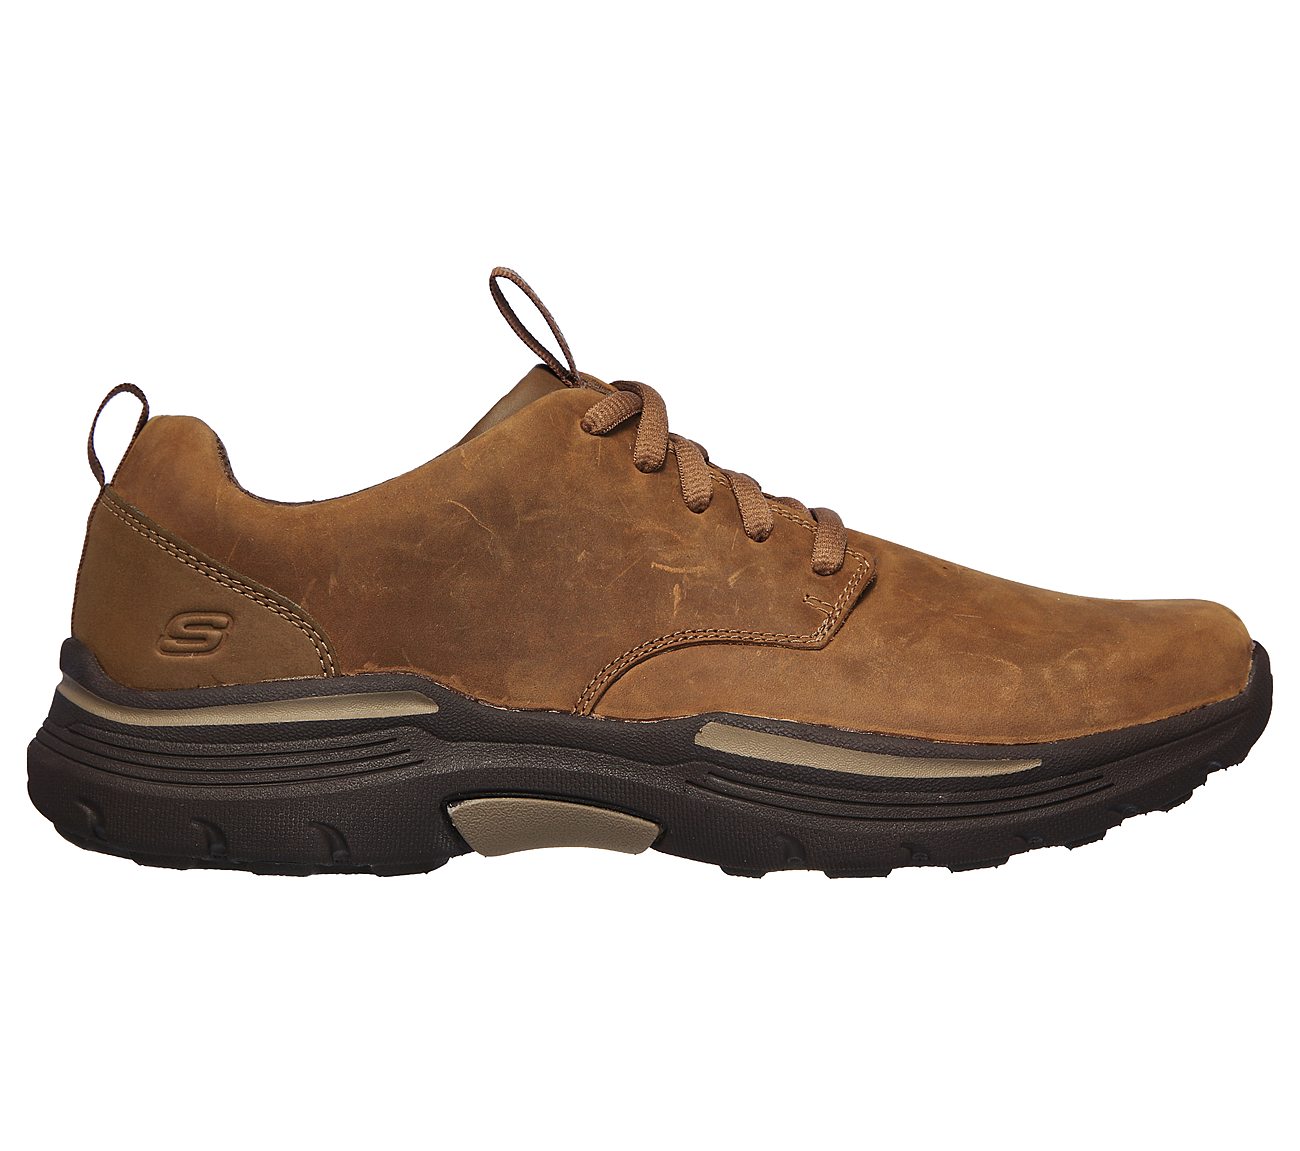 Buy SKECHERS Relaxed Fit: Expended - Carvalo USA Casuals Shoes